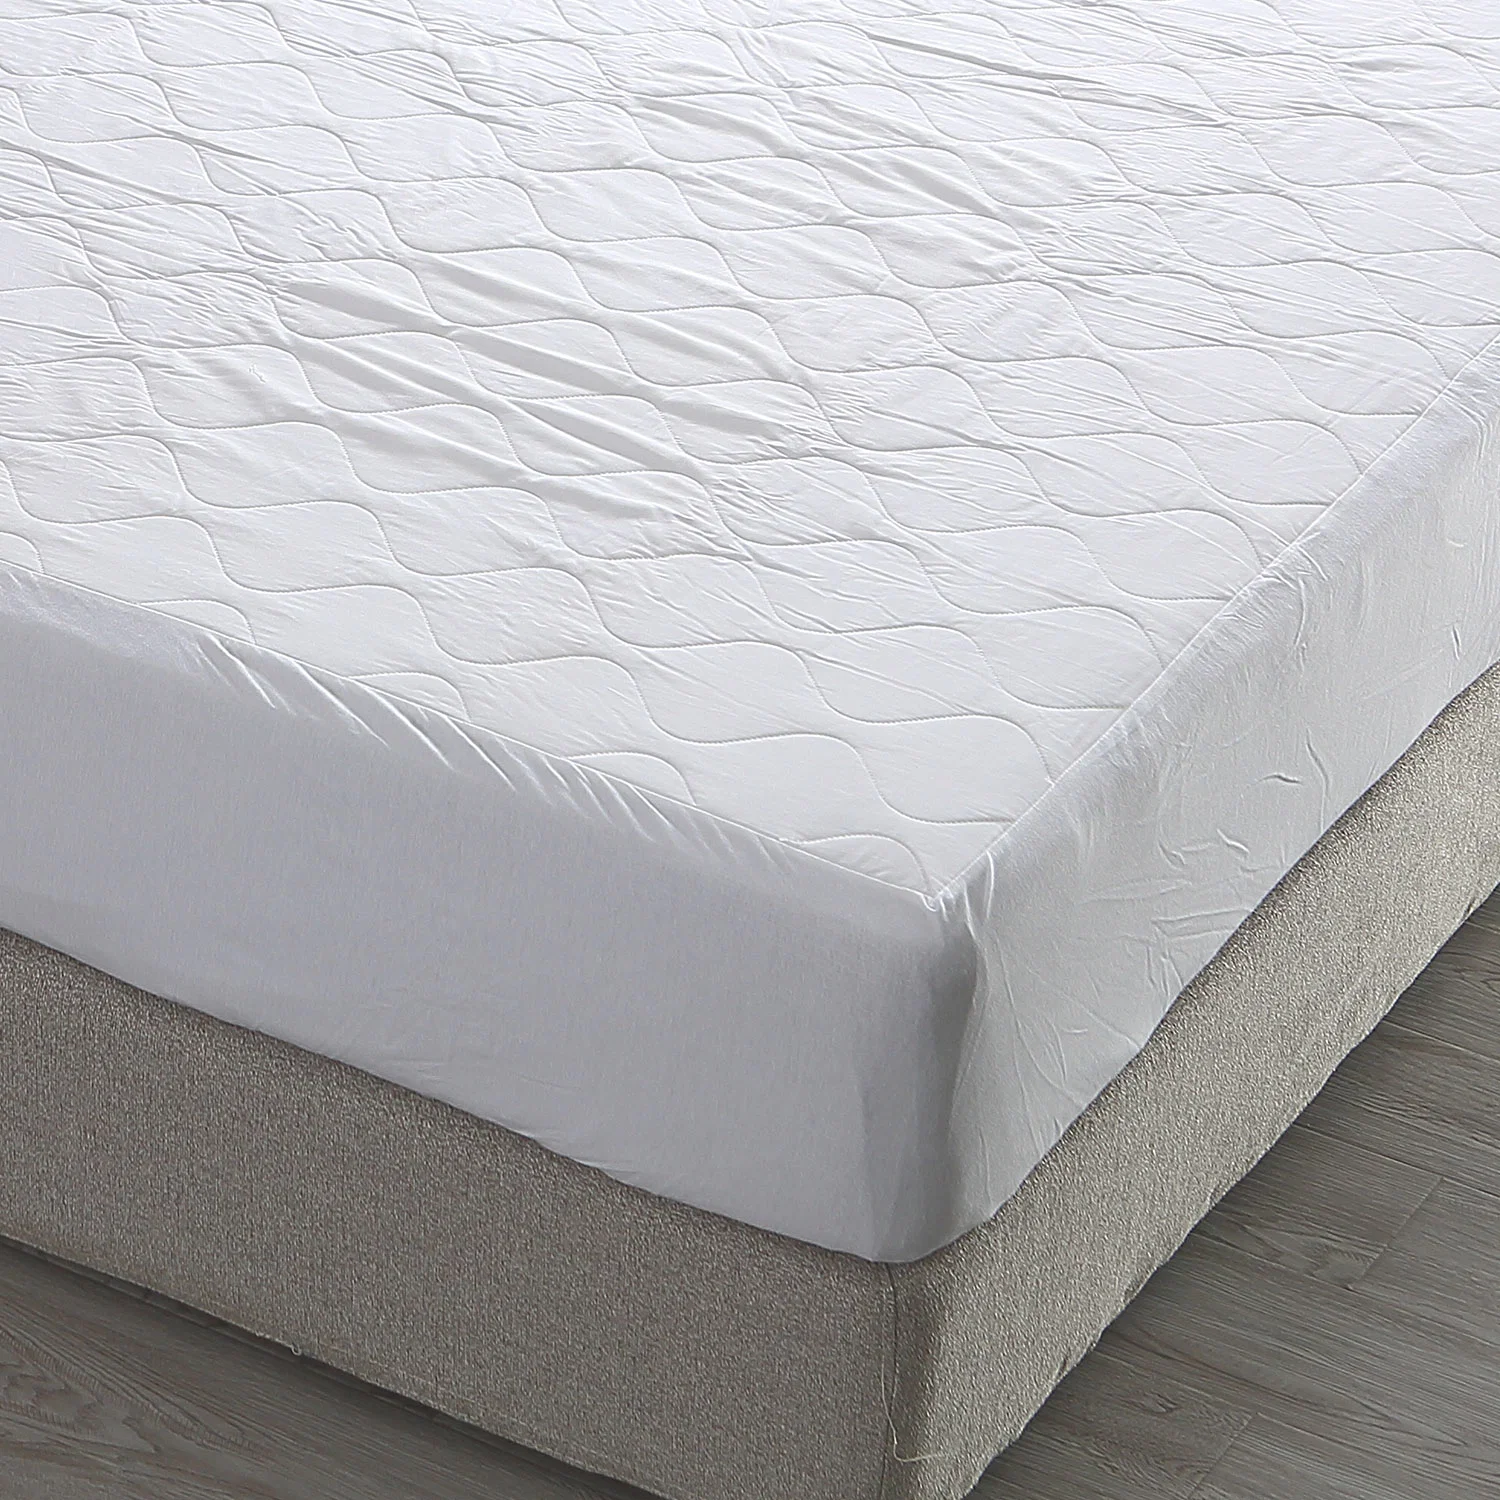 Anti Dust Cotton Soft Breathable Durable Mattress Cover Protective